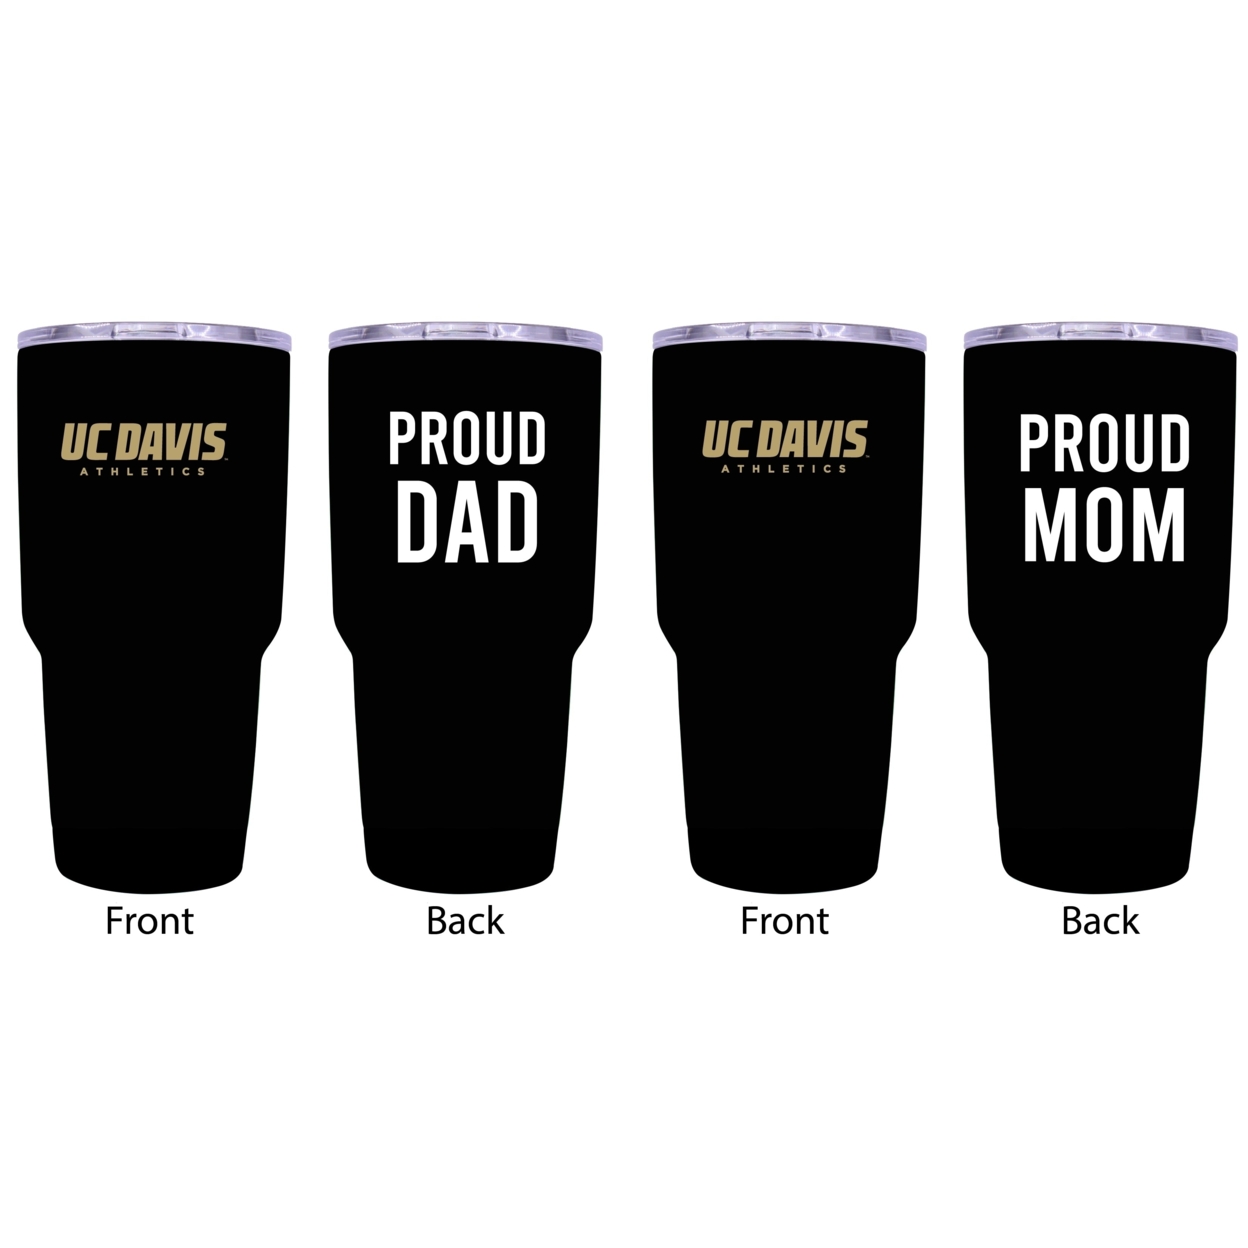 UC Davis Aggies Proud Mom And Dad 24 Oz Insulated Stainless Steel Tumblers 2 Pack Black.